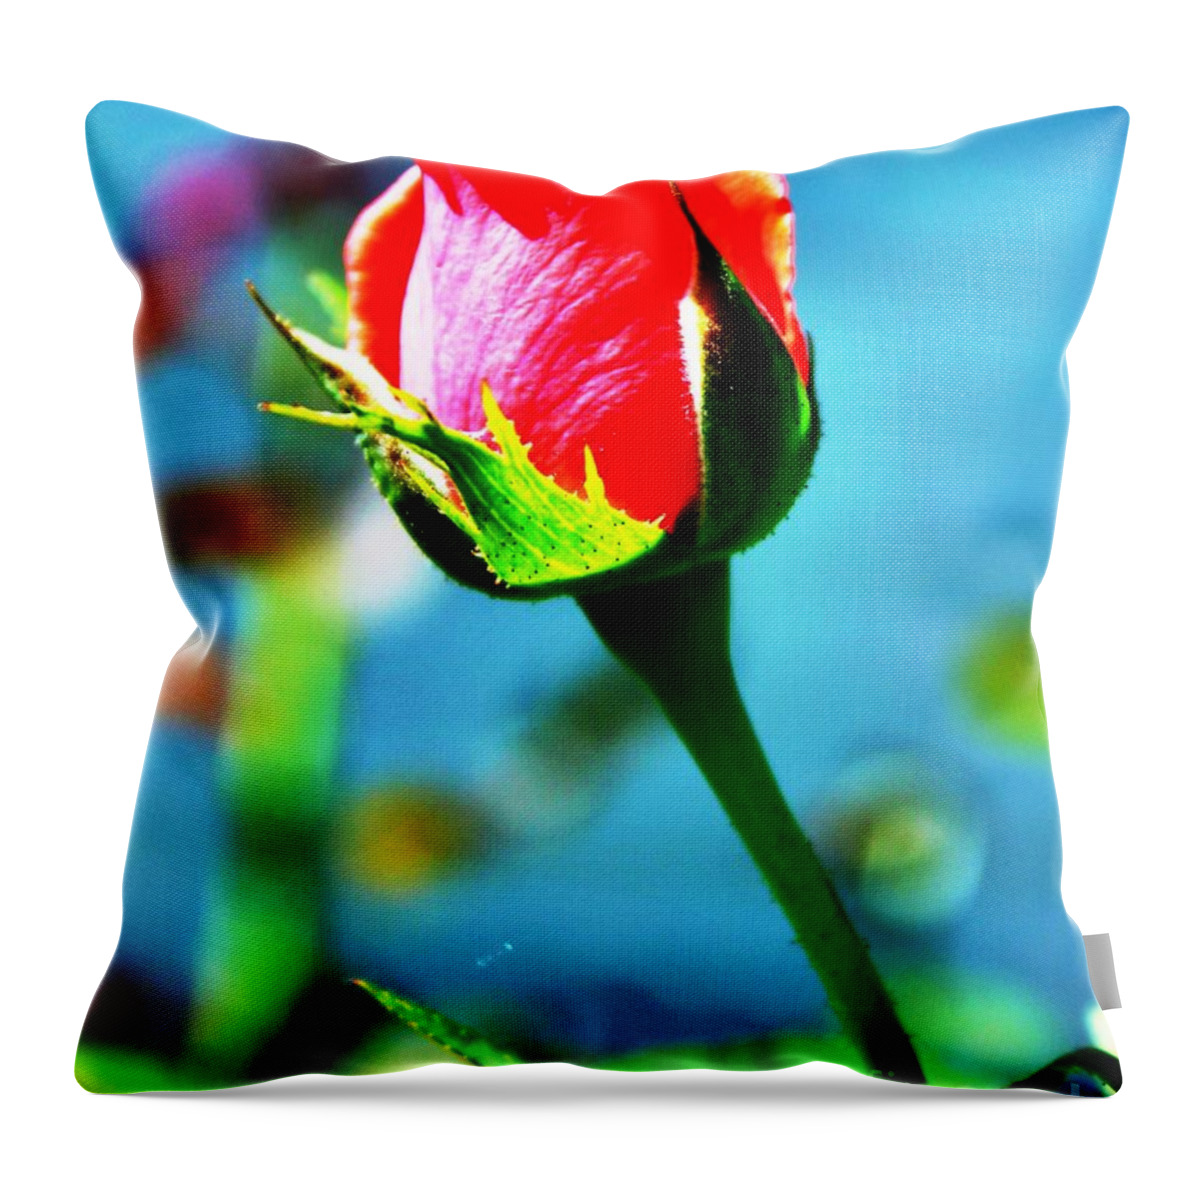 Single Rose Throw Pillow featuring the photograph Sunlite Rose Bud by Judy Palkimas